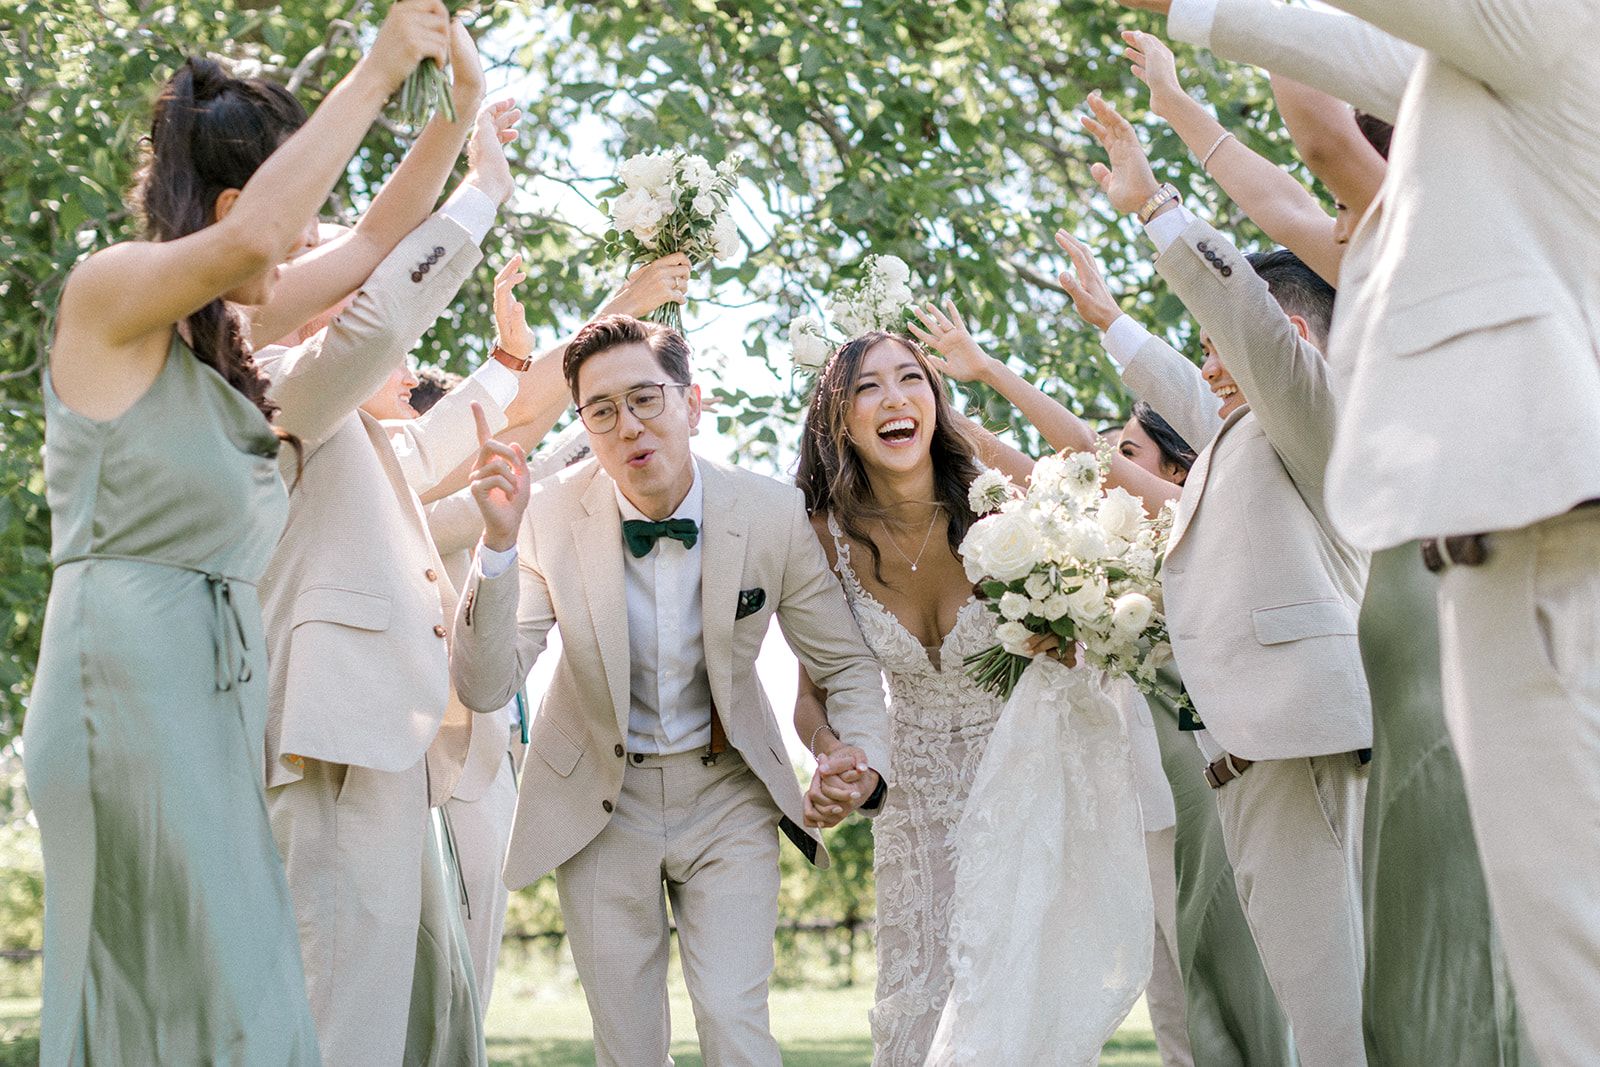 Bridal Party laughs and celebrates during portrait photos on wedding day 